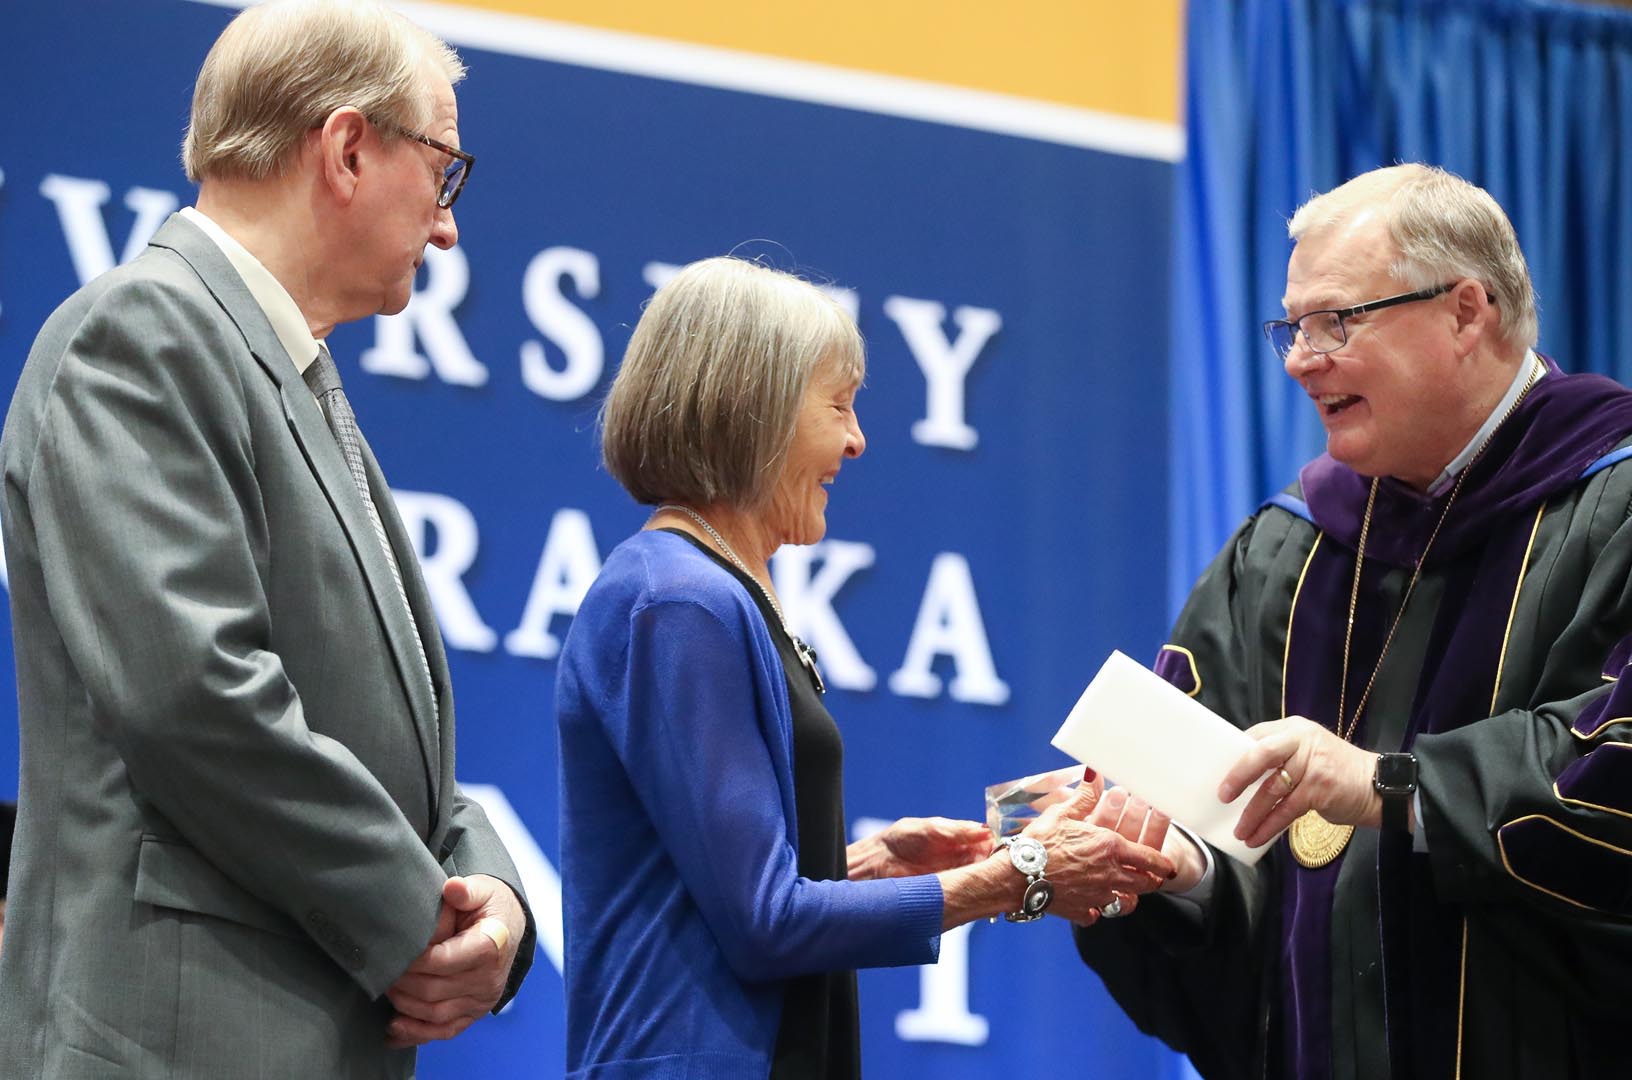 UNK Chancellor Doug Kristensen, right, presents the Ron and Carol Cope Cornerstone of Excellence Award to Jerry and Nancy Dulitz during Friday's spring commencement at the Health and Sports Center. (Photo by Corbey R. Dorsey, UNK Communications)